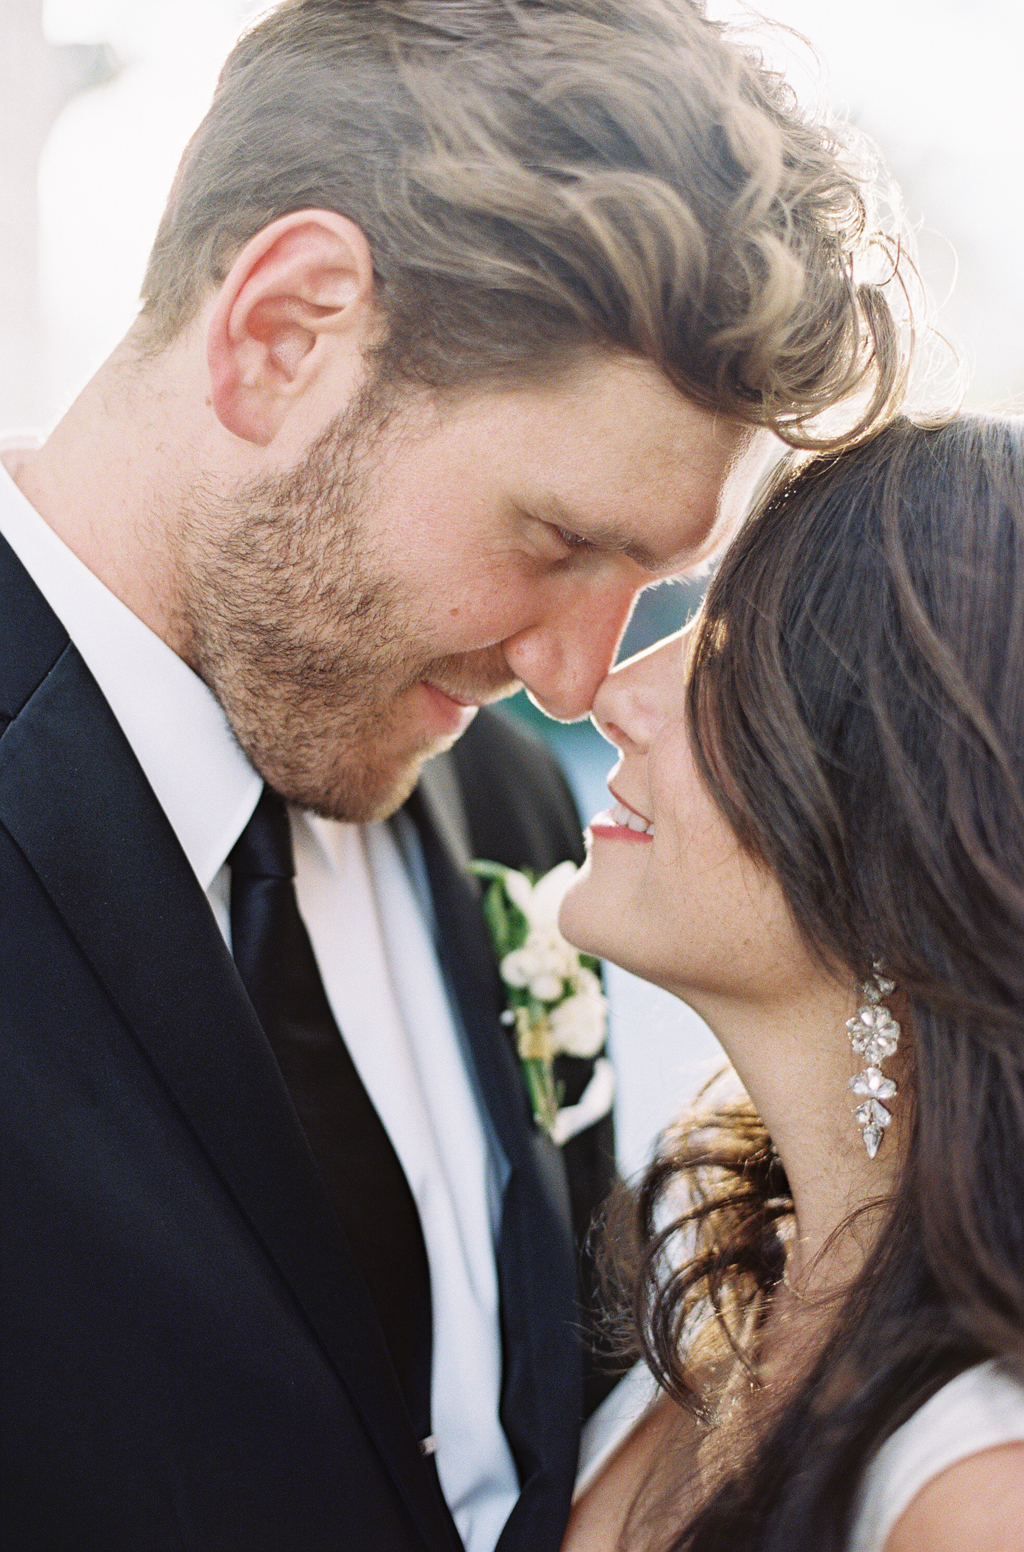 an intimate portrait of a bride and groom touching faces on their wedding day in palm springs, california.